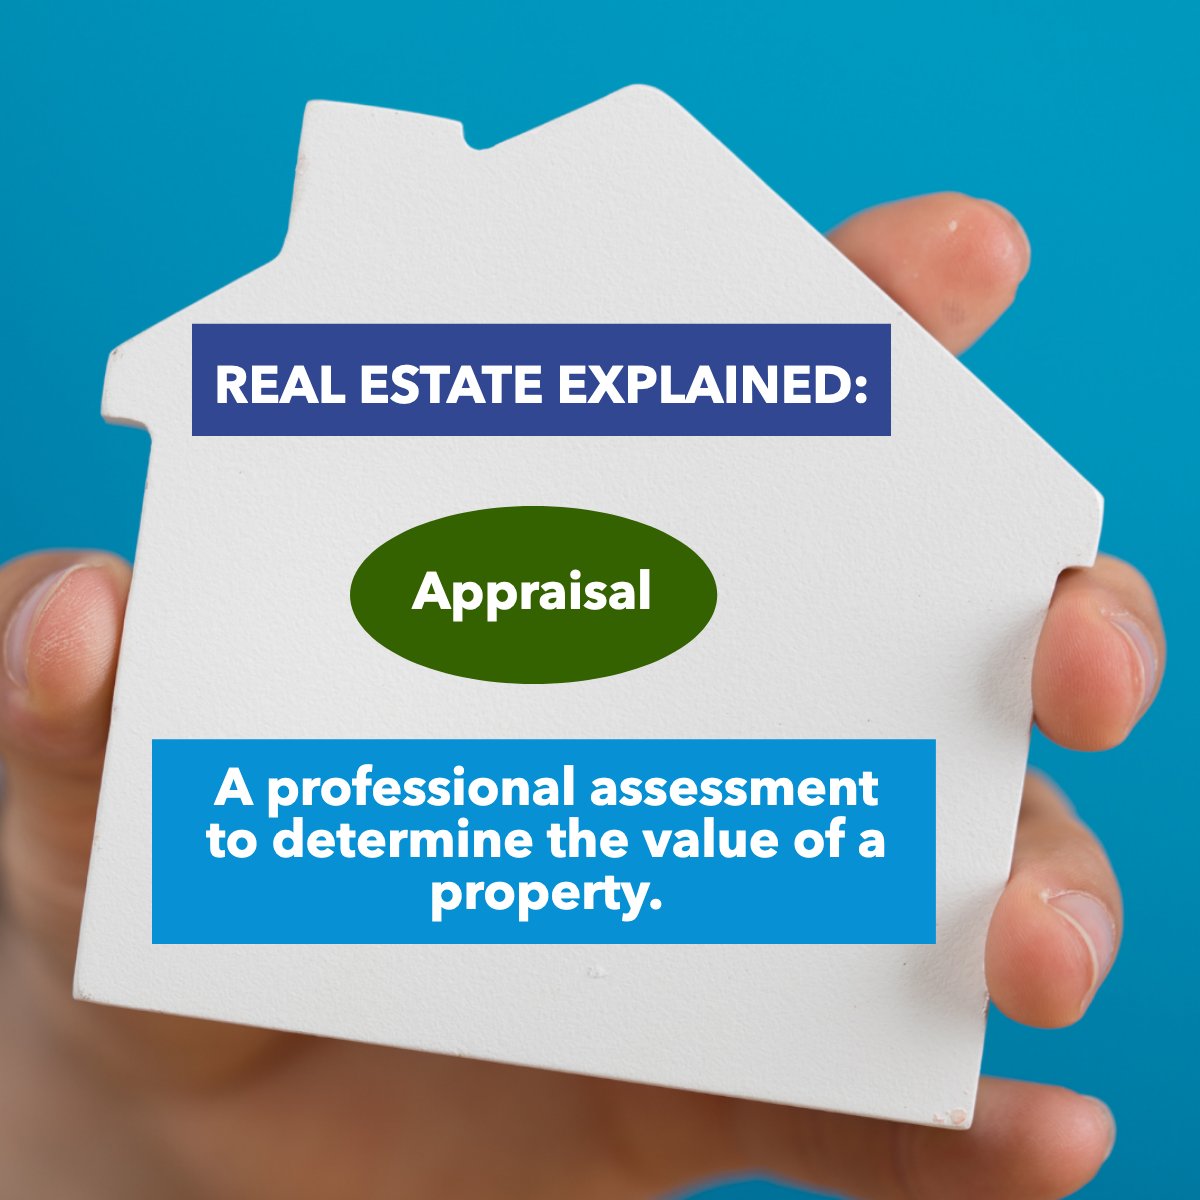 A good appraiser will consider all factors that could affect the property's value. 🤓 #appraisal #marketvalue #homeupdates #homeselling #homeowner